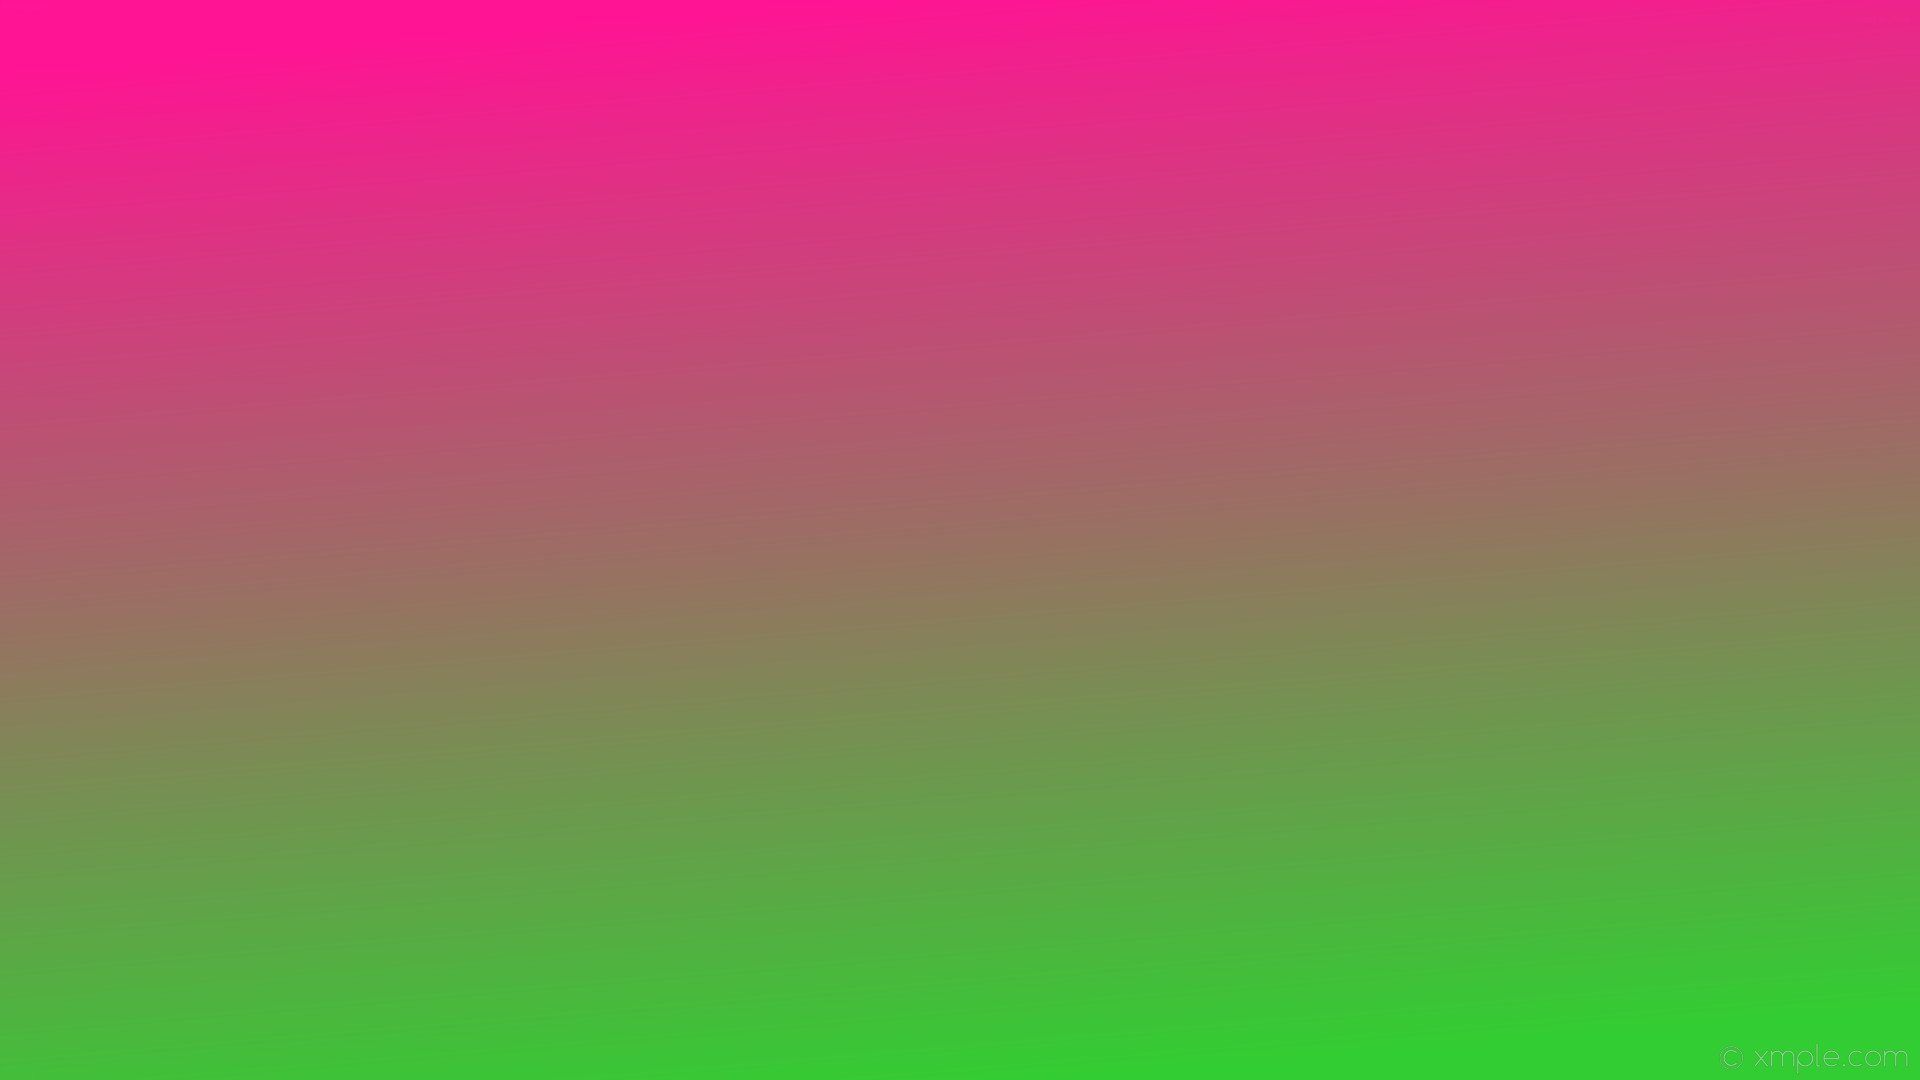 Wallpaper Gradient Green Linear Pink Deep Pink Lime Green Roy Purdy